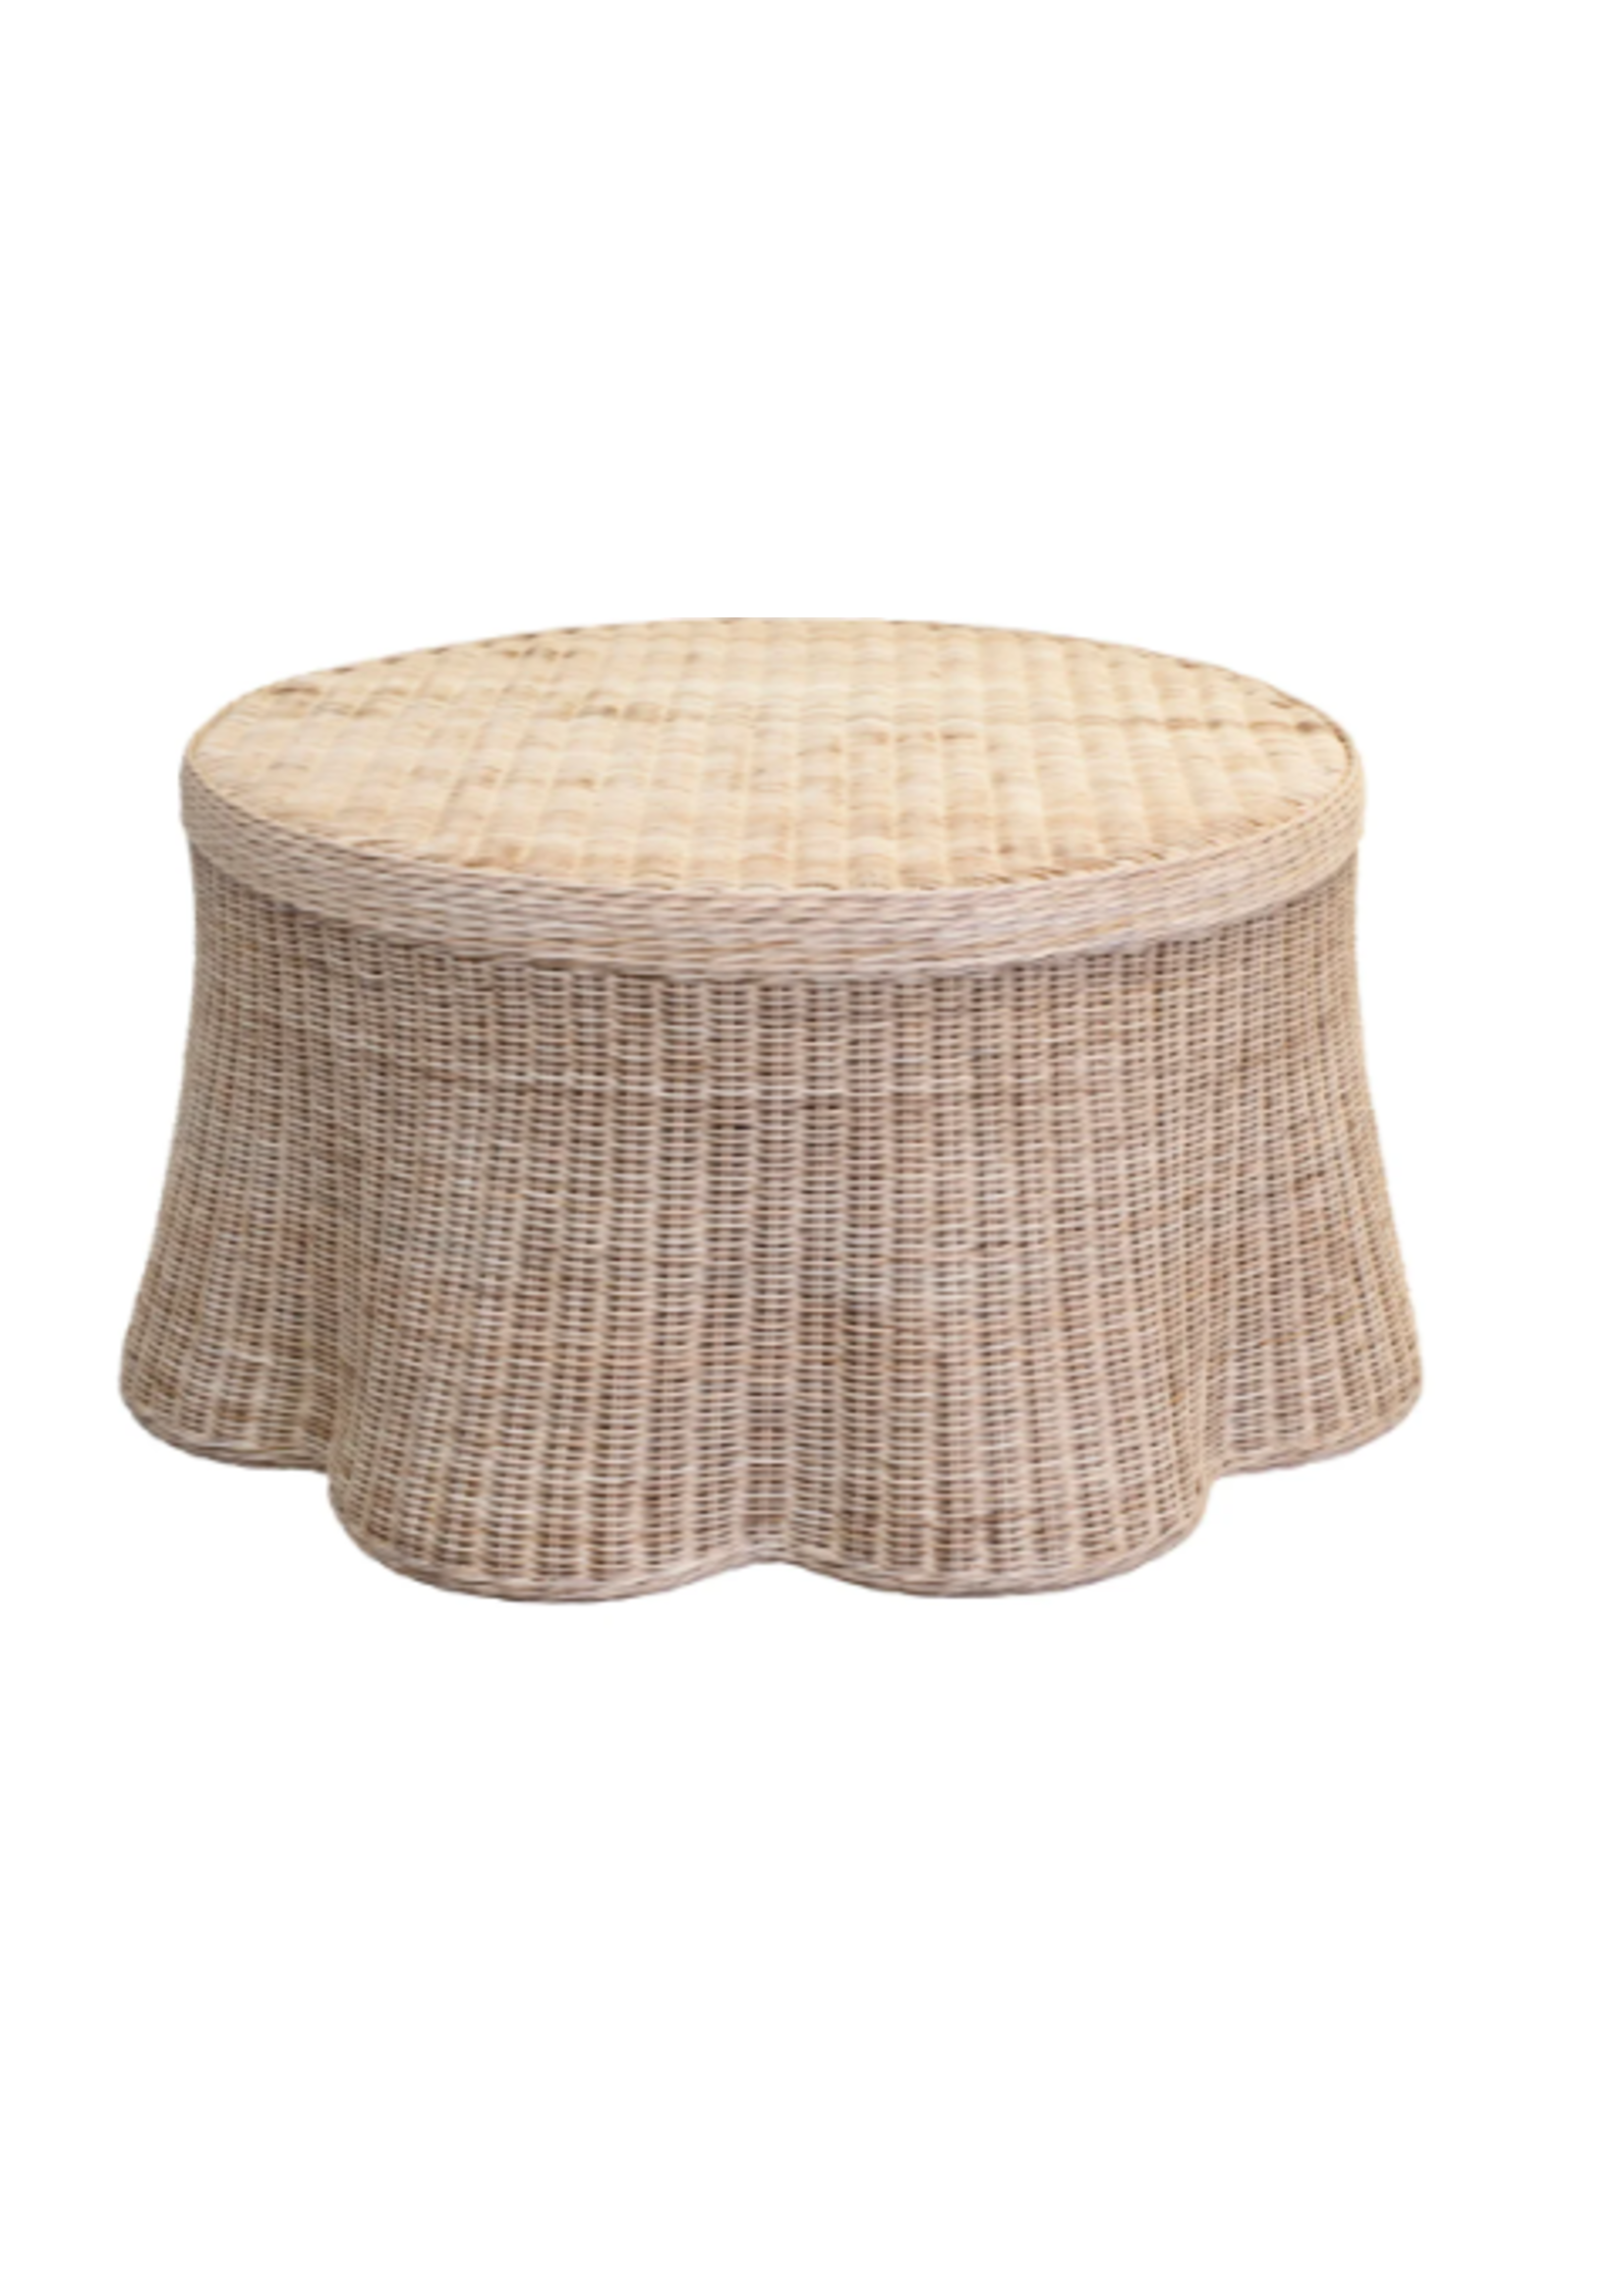 Mainly Baskets Mainly Baskets Scallop Coffee Table 36"